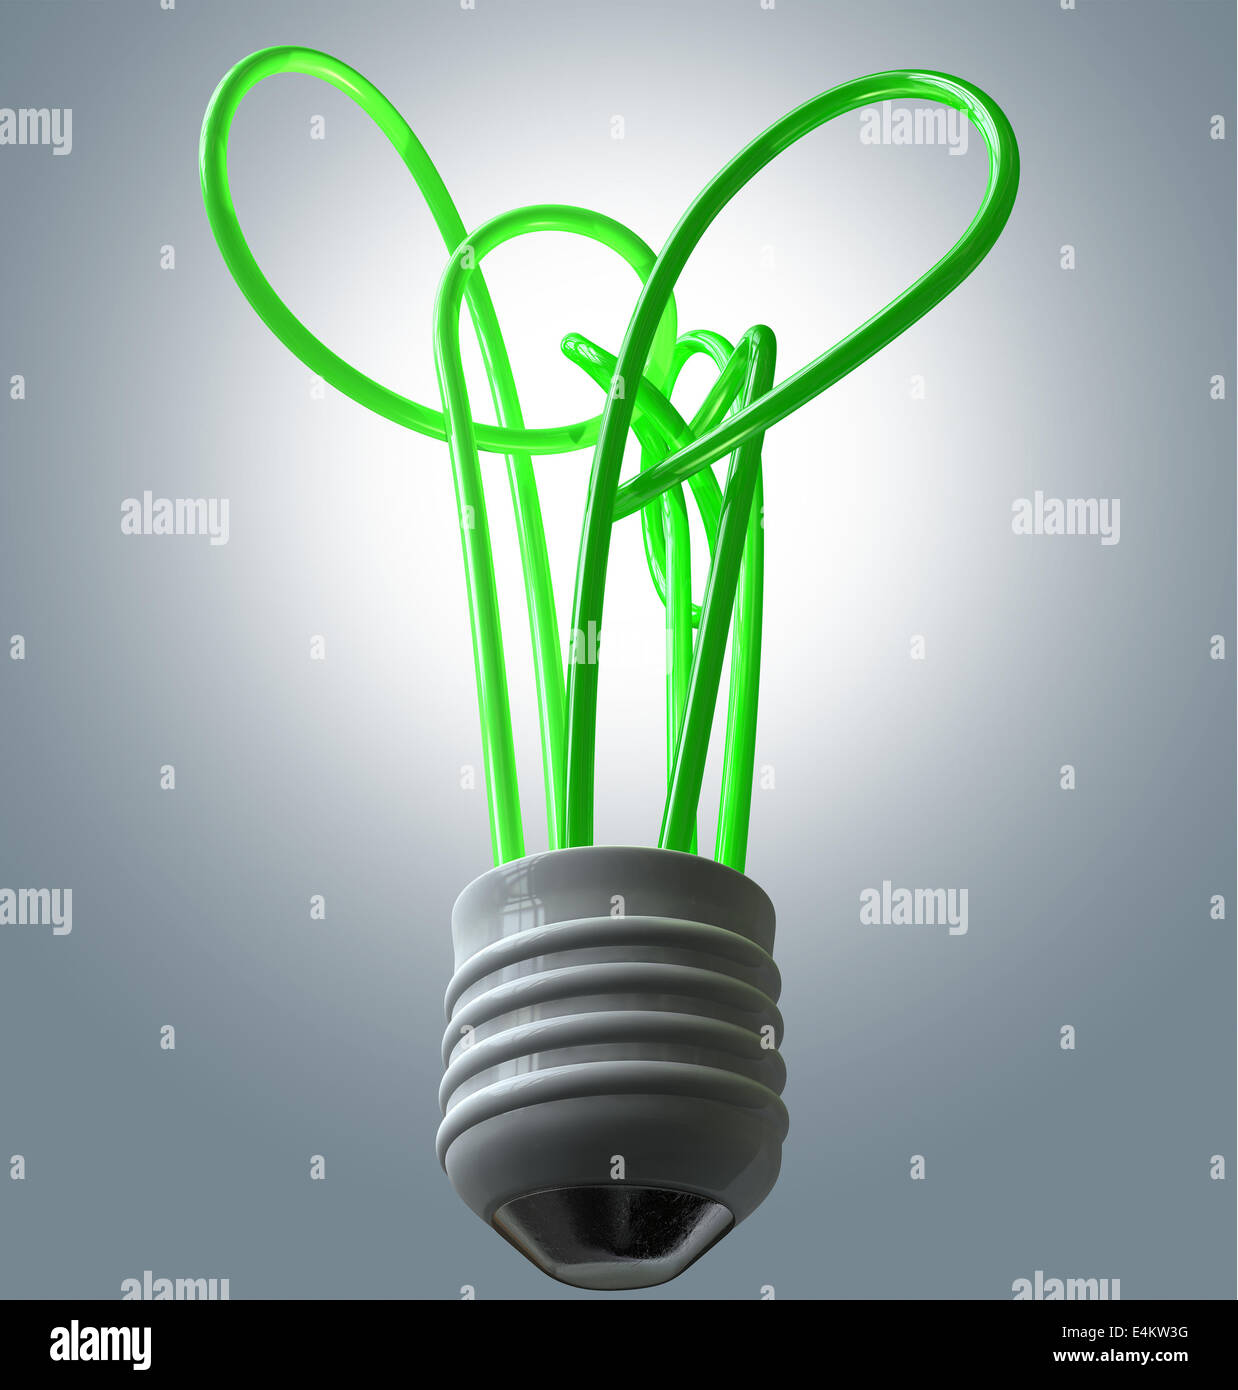 A collection of green flourescent tubes representing a tree and lightbulb with a threaded base symbolizing green energy on an is Stock Photo